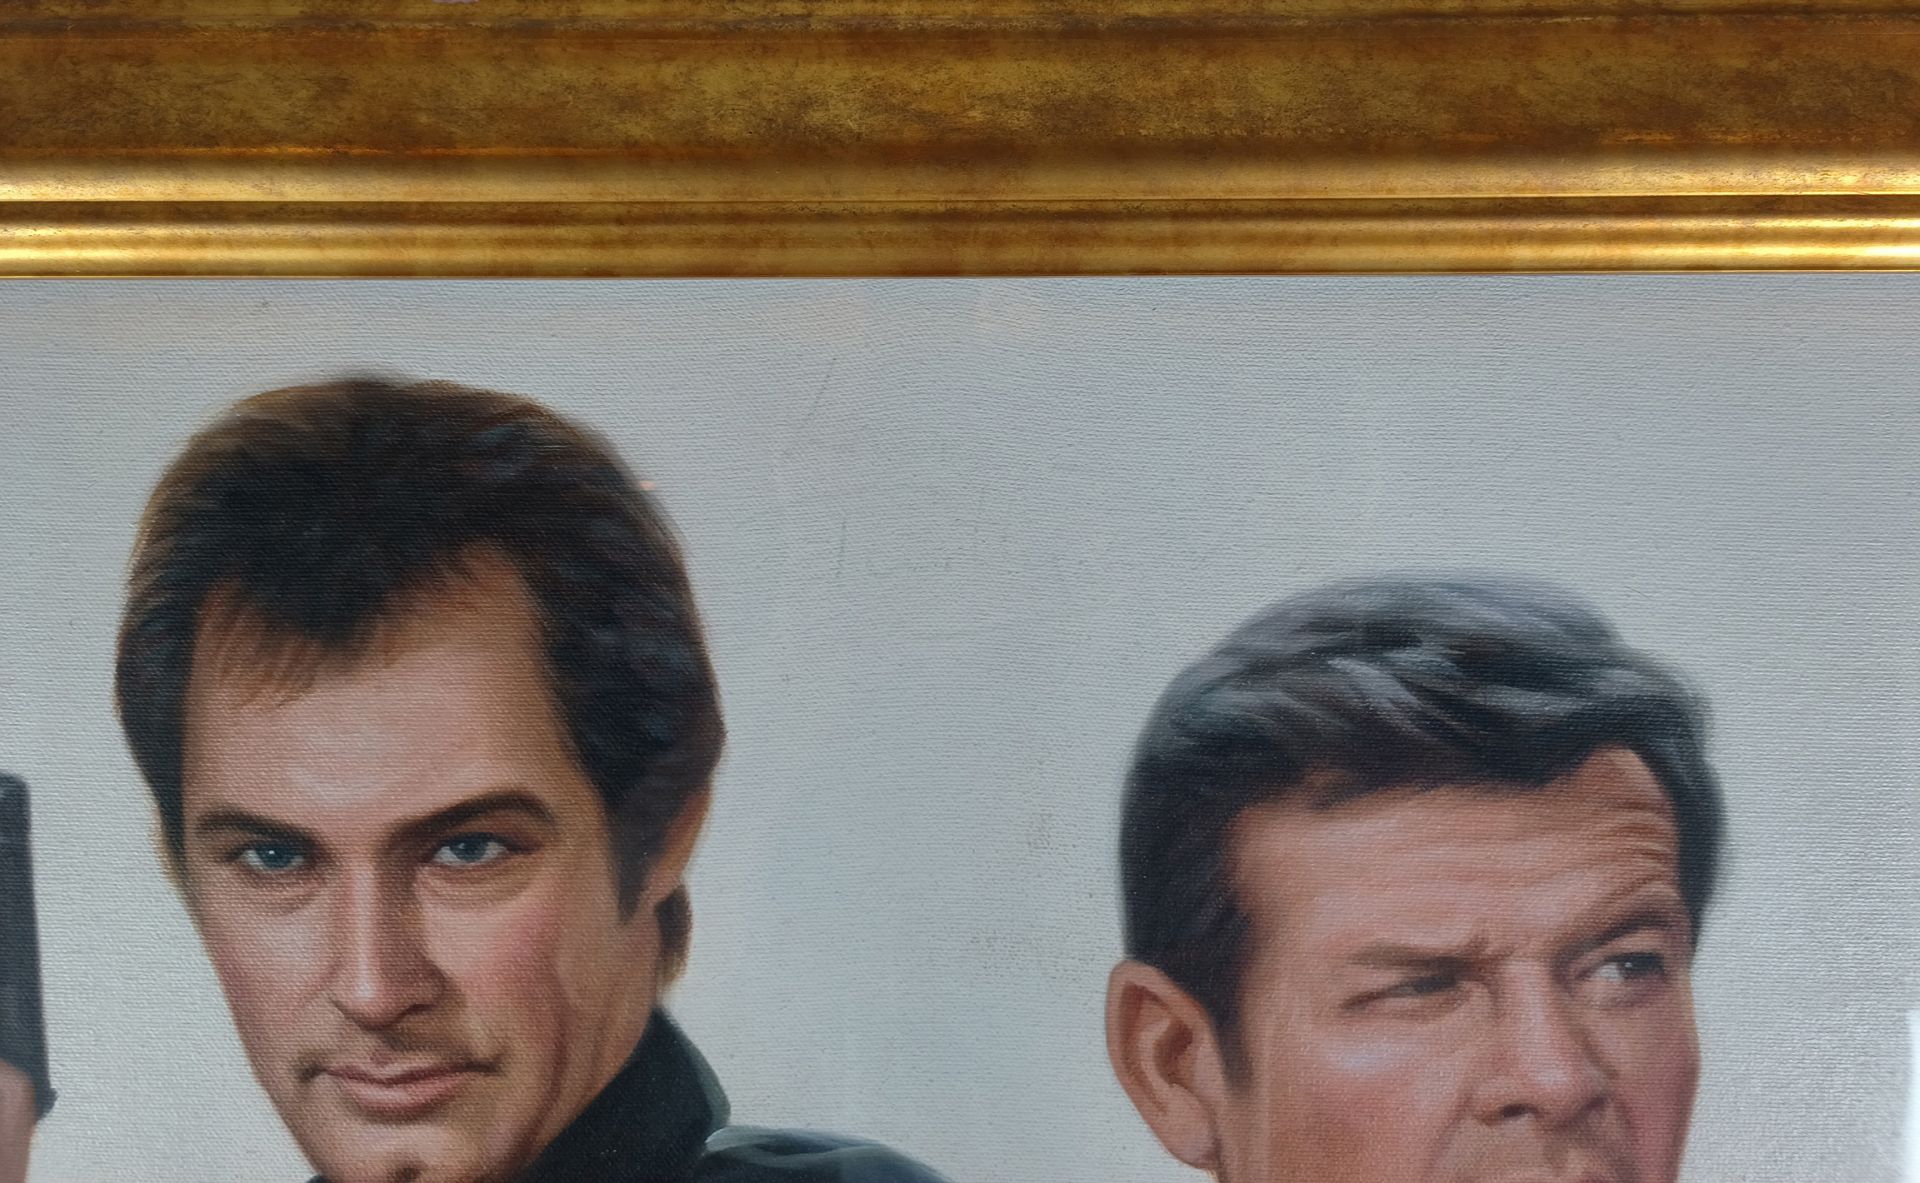 Oil Painting of 4 James Bond Actors with Signatures - Image 7 of 8